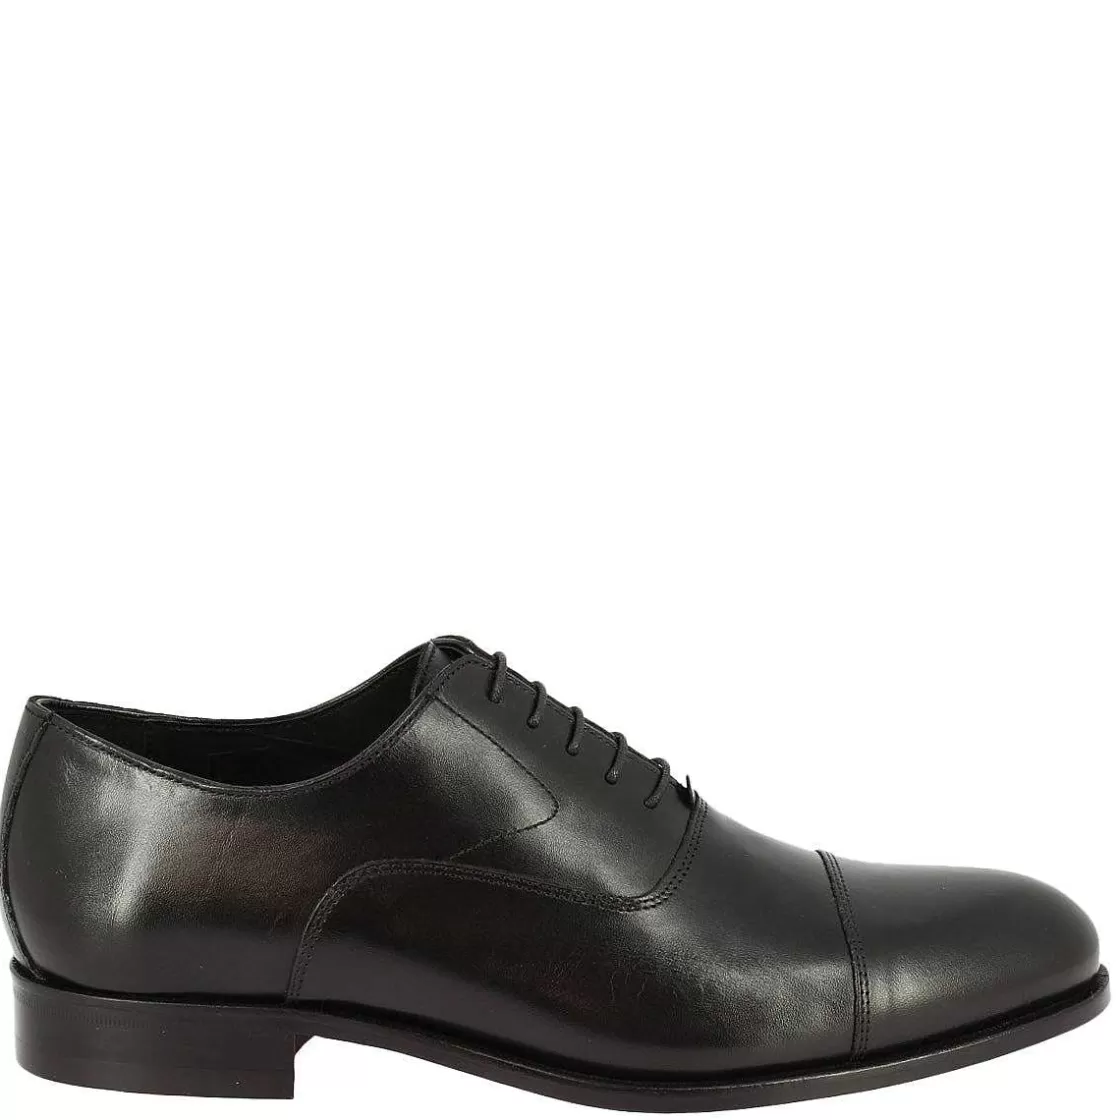 Leonardo Men'S Handmade Lace-Up Shoes In Black Calf Leather Clearance